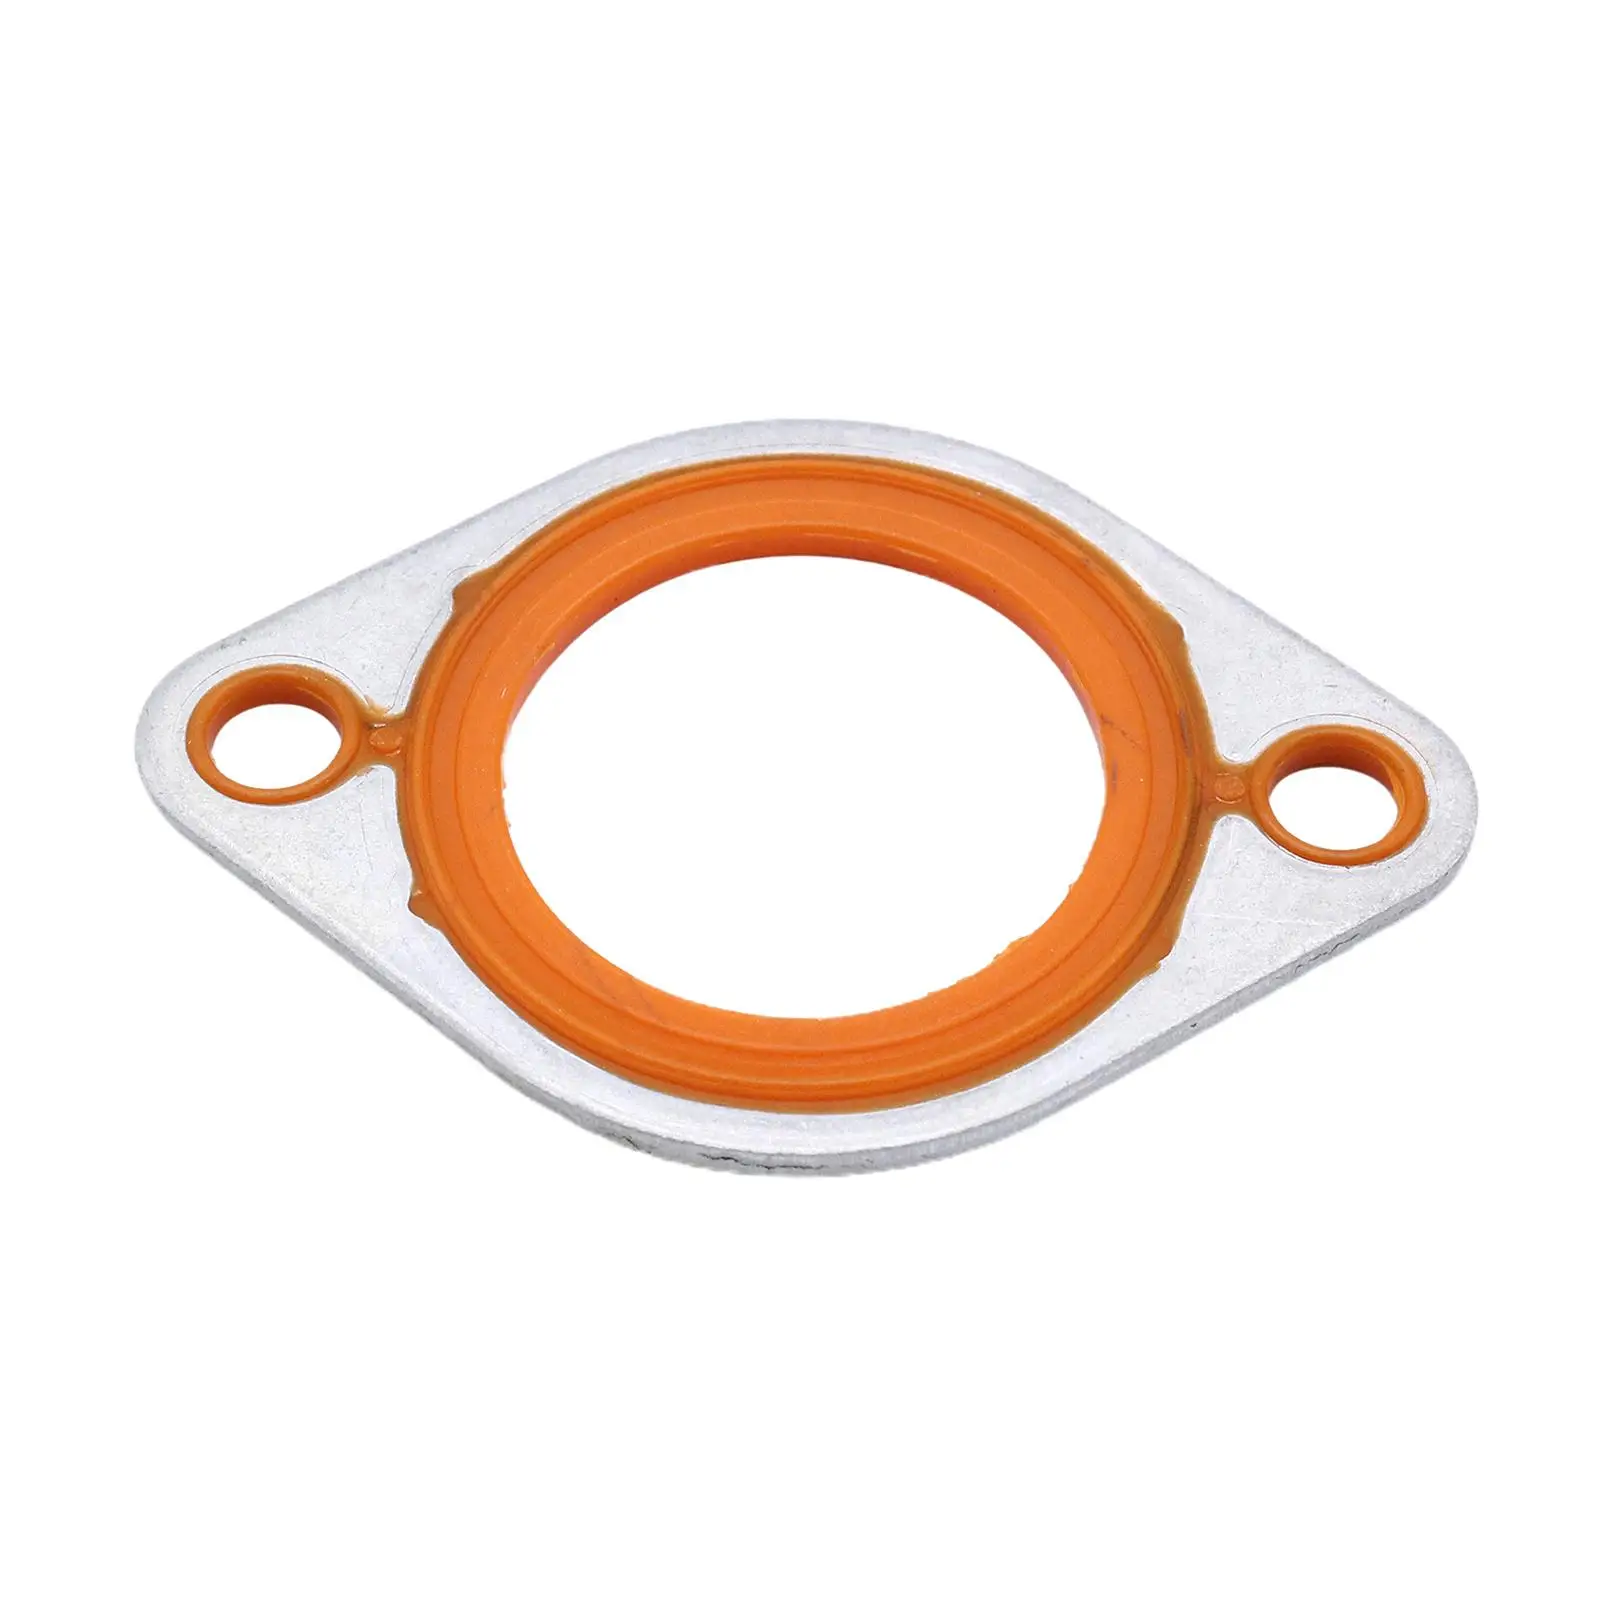  Water Neck Housing Gasket, for  383 427 454 502 Aluminum/Silicone, Easy to Install